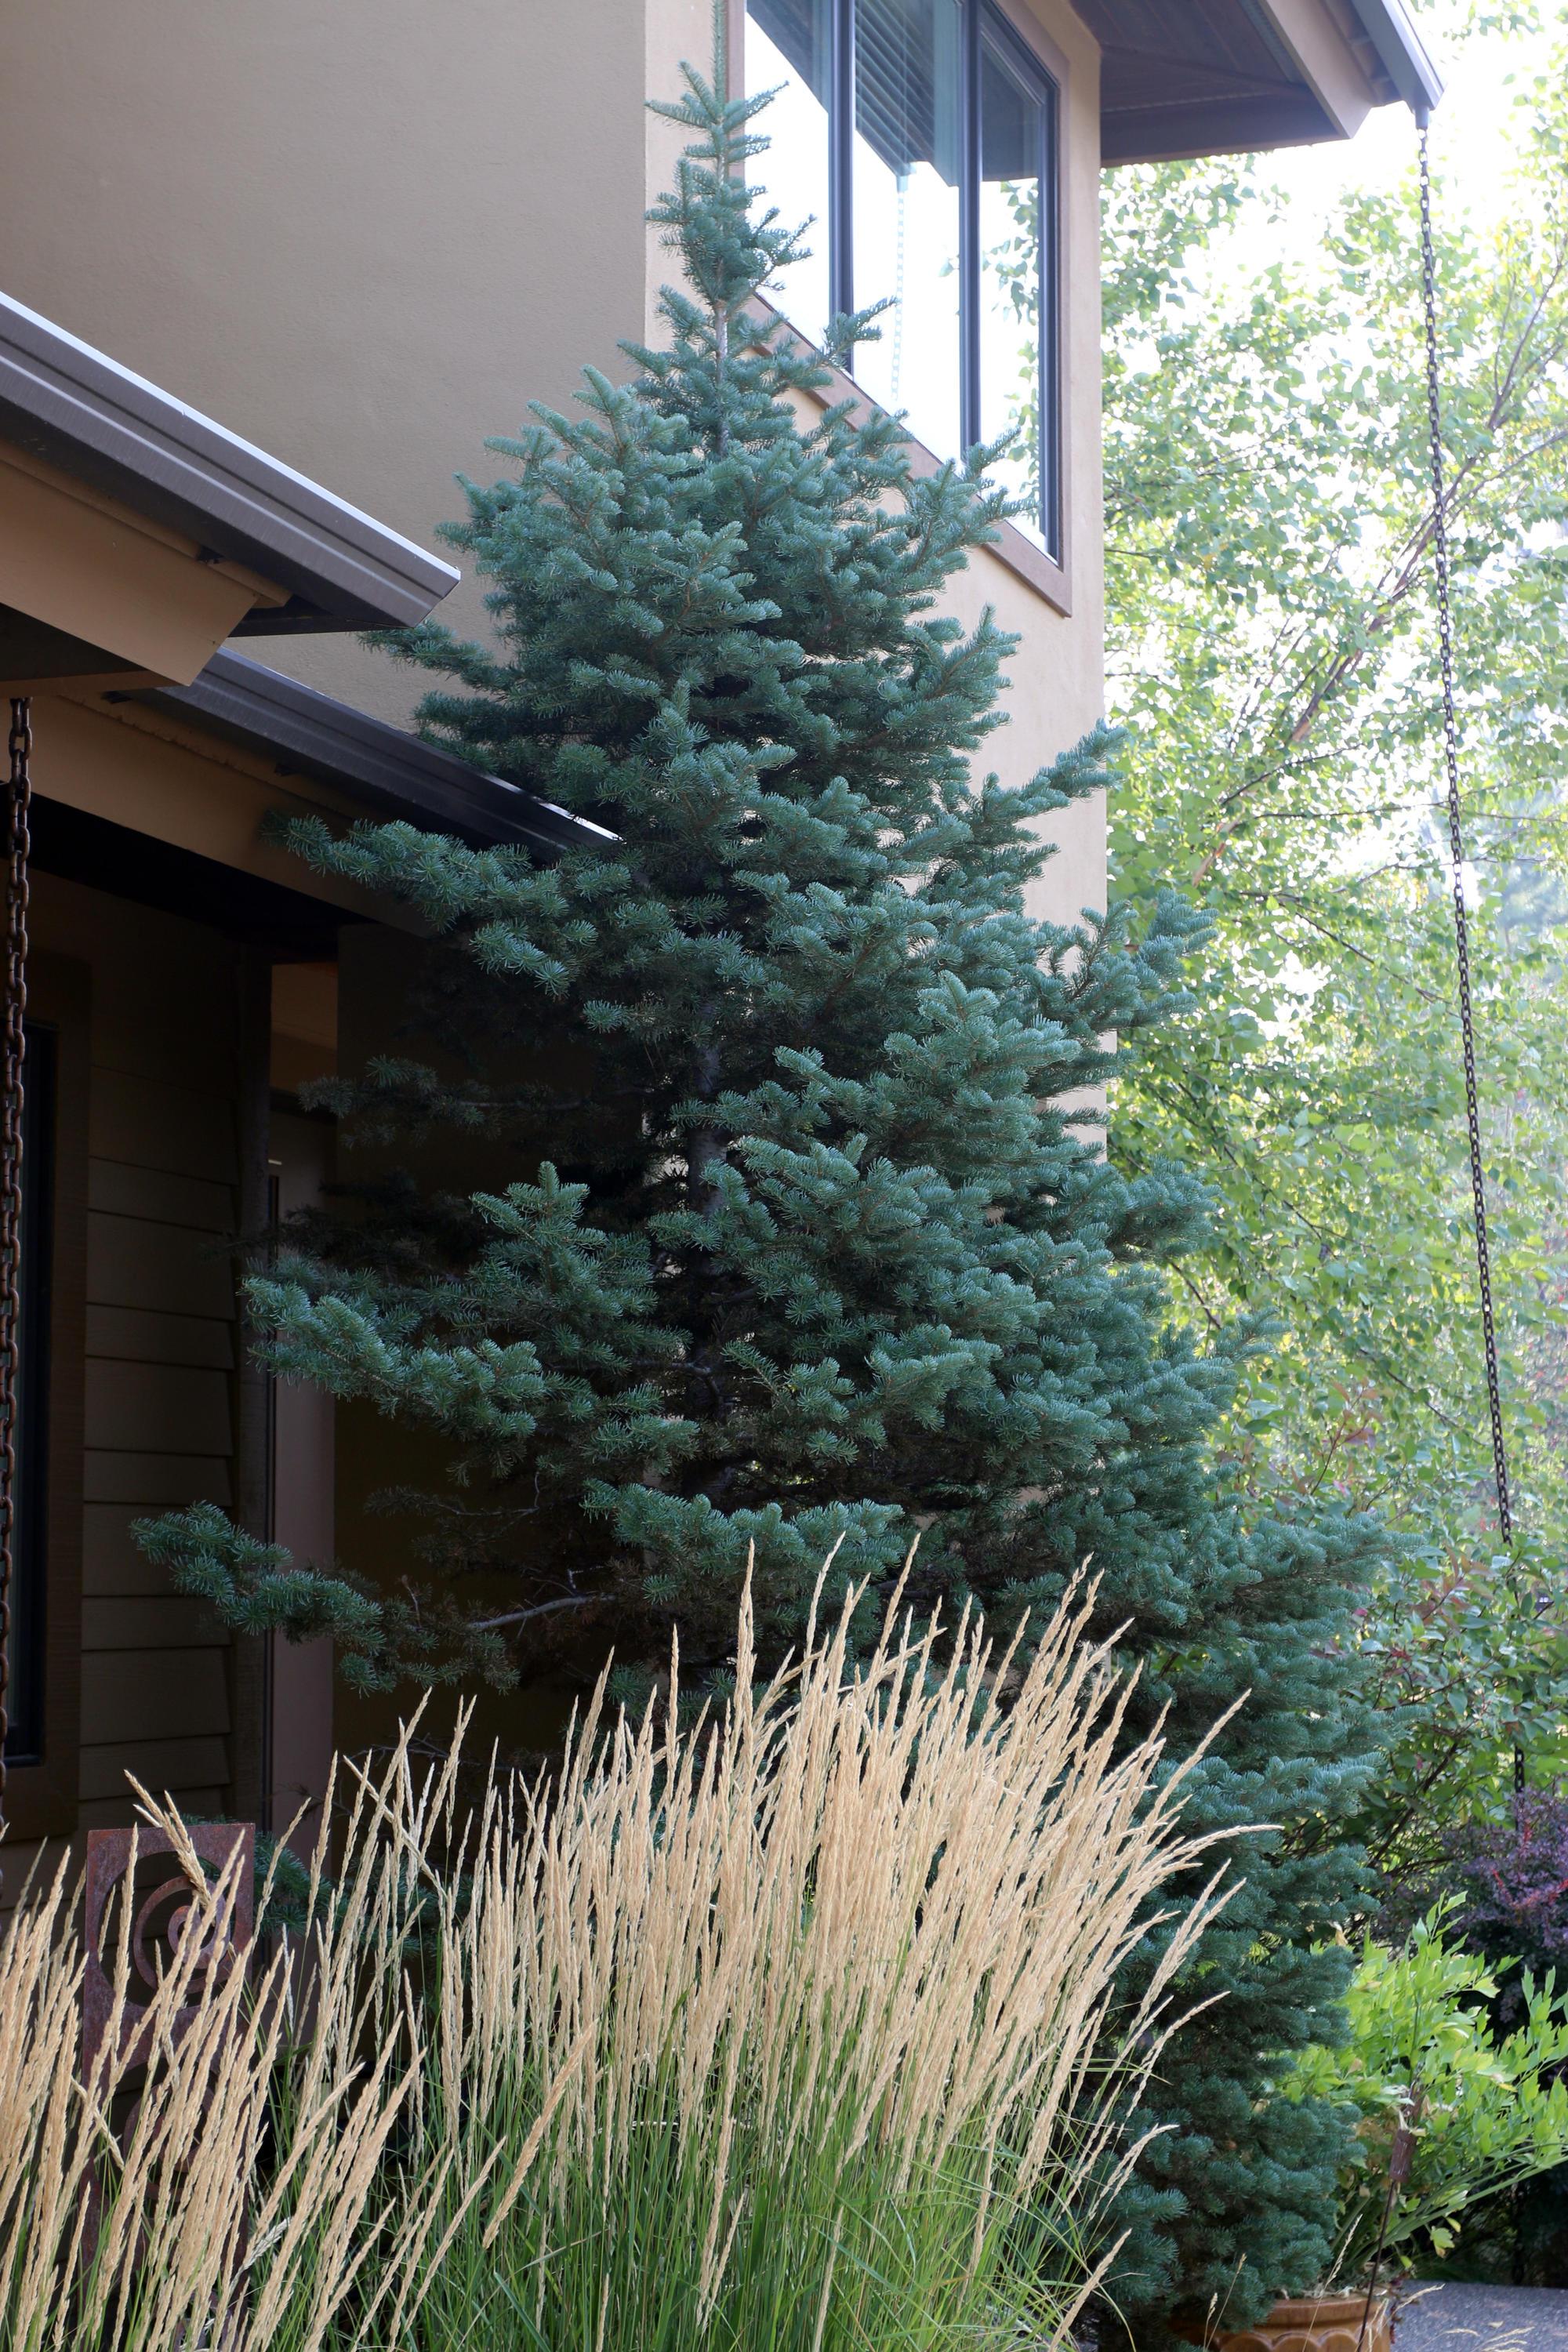 A spruce tree next to a home with grasses in foreground